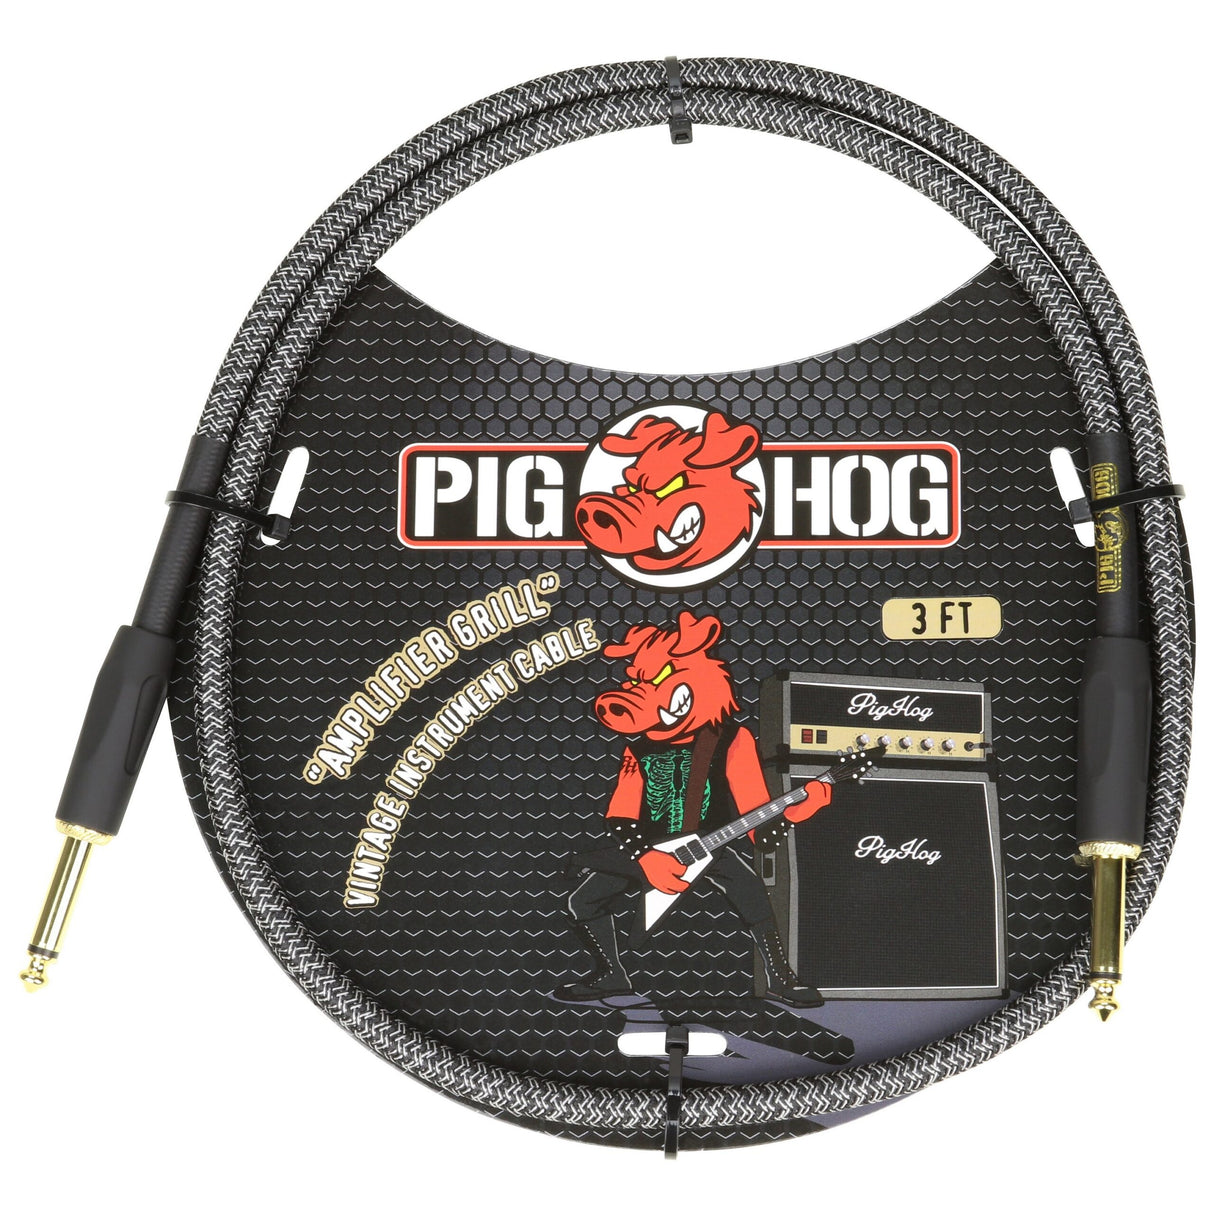 Pig Hog PCH3AG "Amplifier Grill" 3ft Right Angled Patch Cables